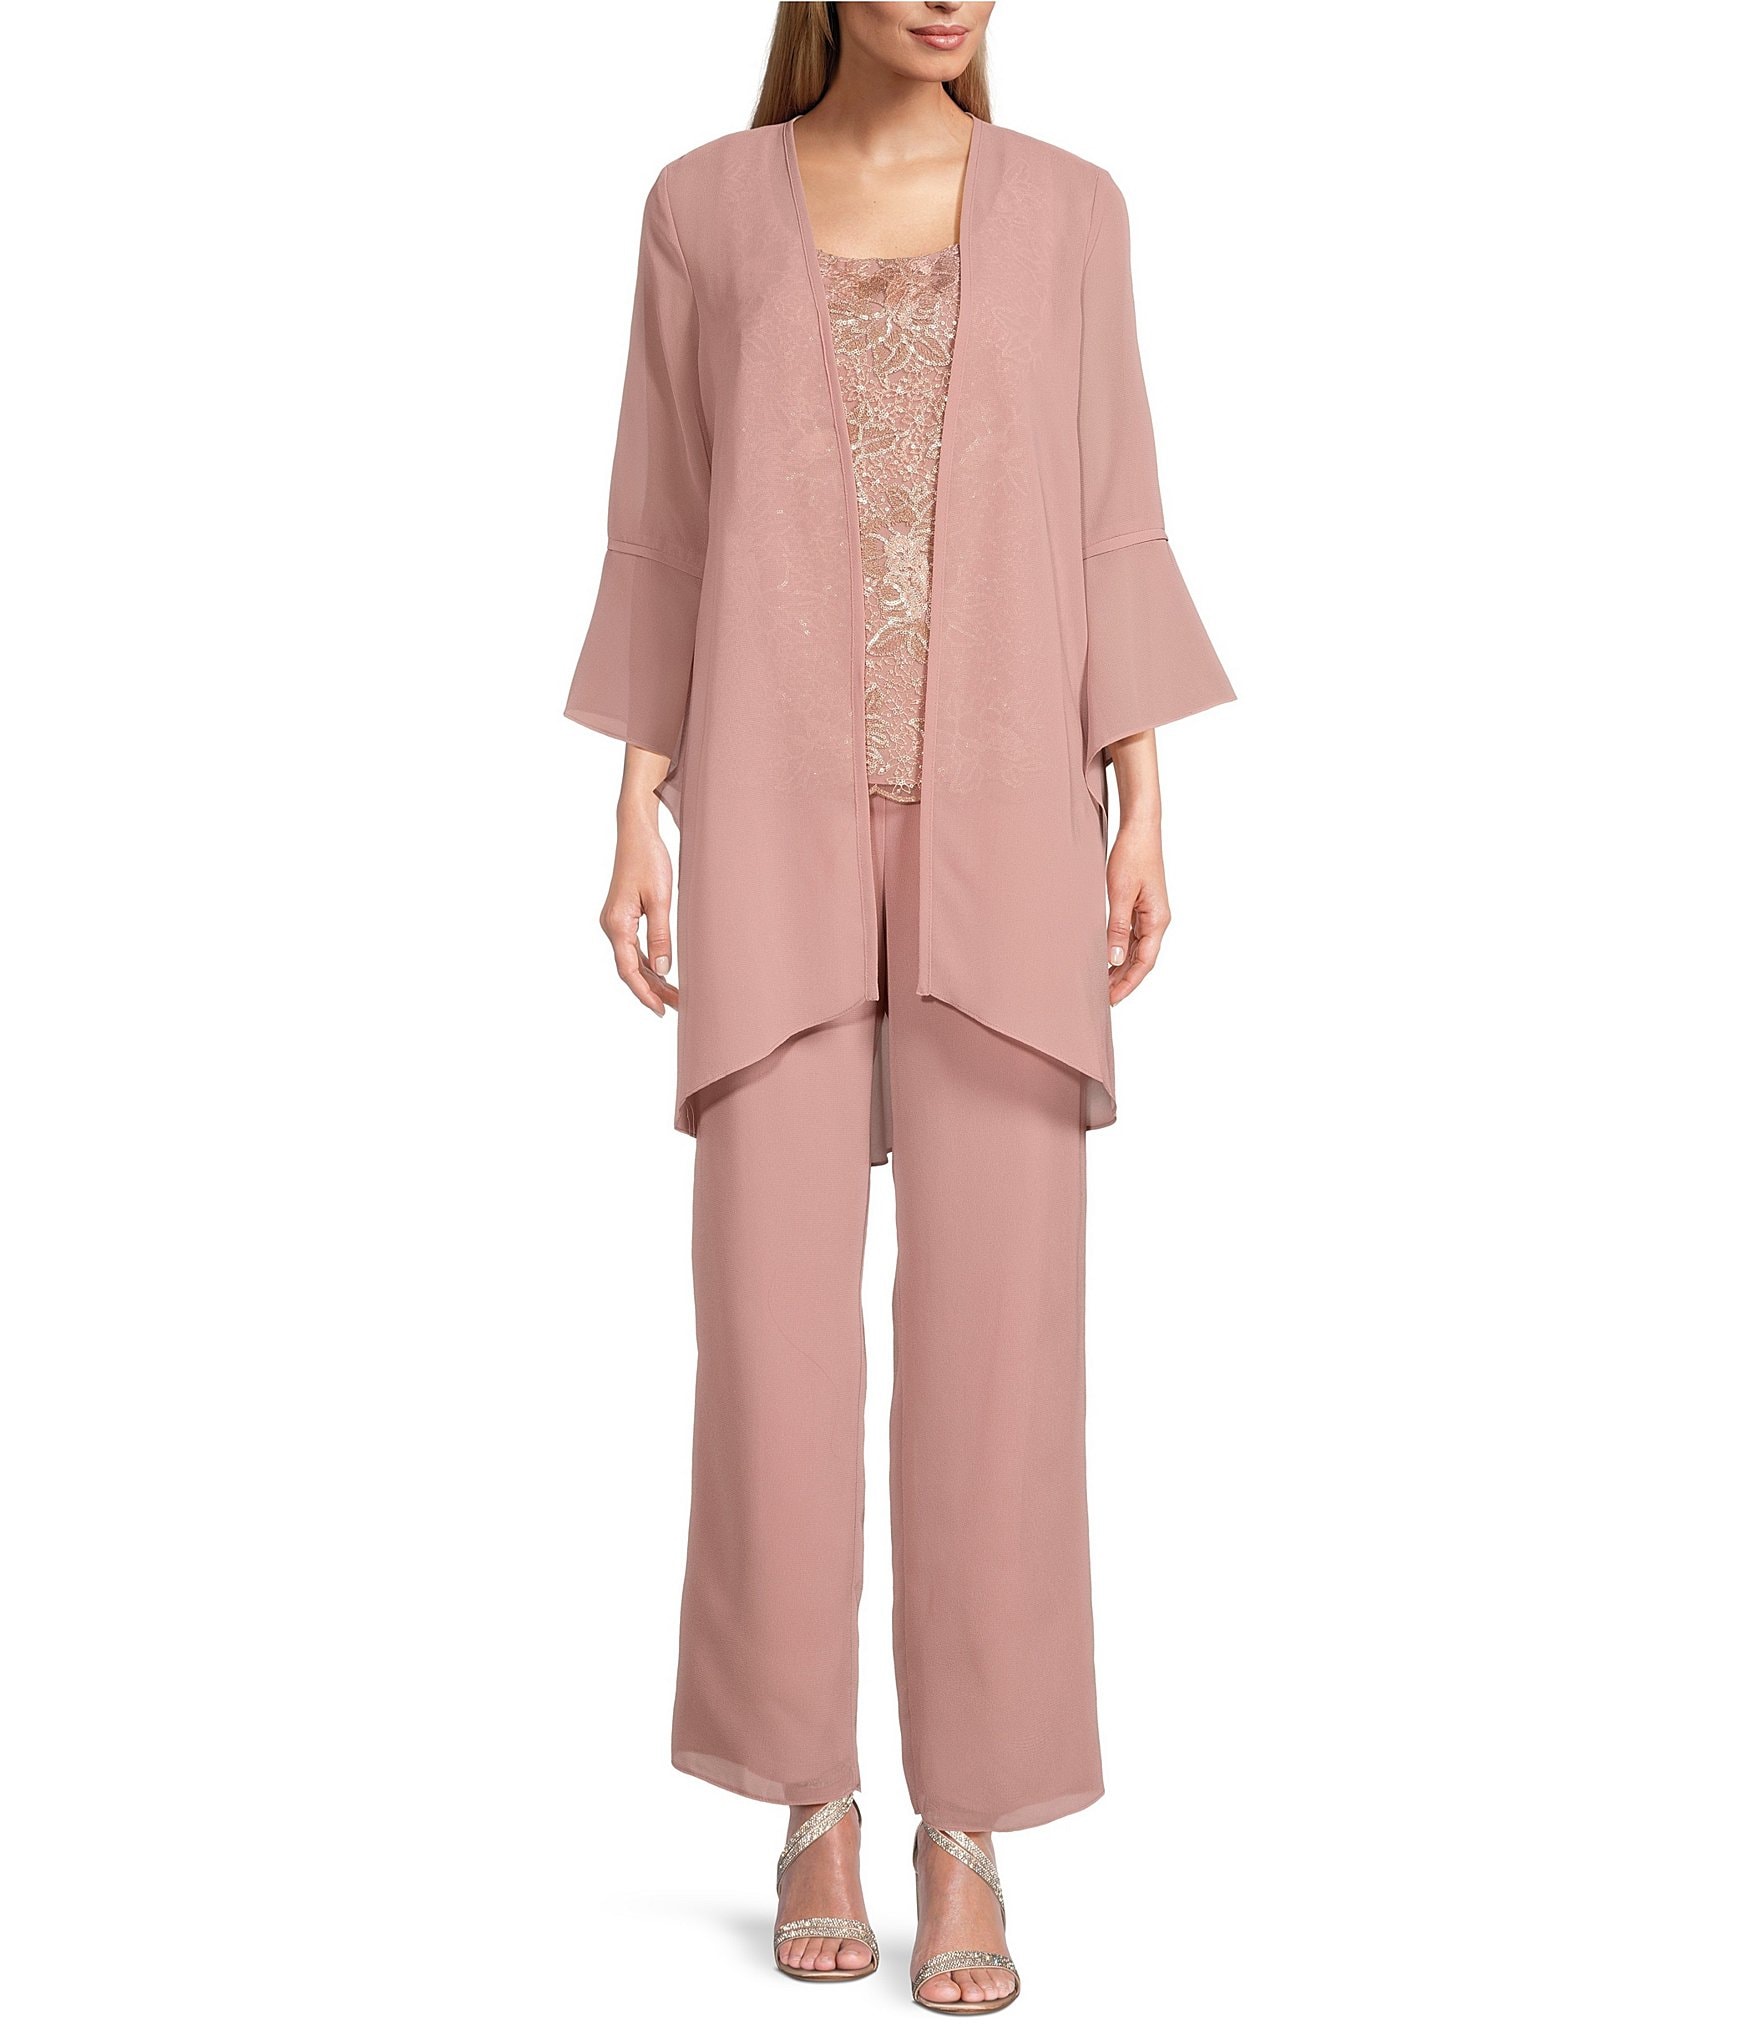 Light Pink Mother Of The Bride Pant Suit Formal Business Outfit For  Weddings, Tuxedo Blazer And Garment Long Sleeve Formal Dresses From  Lindaxu90, $72.05